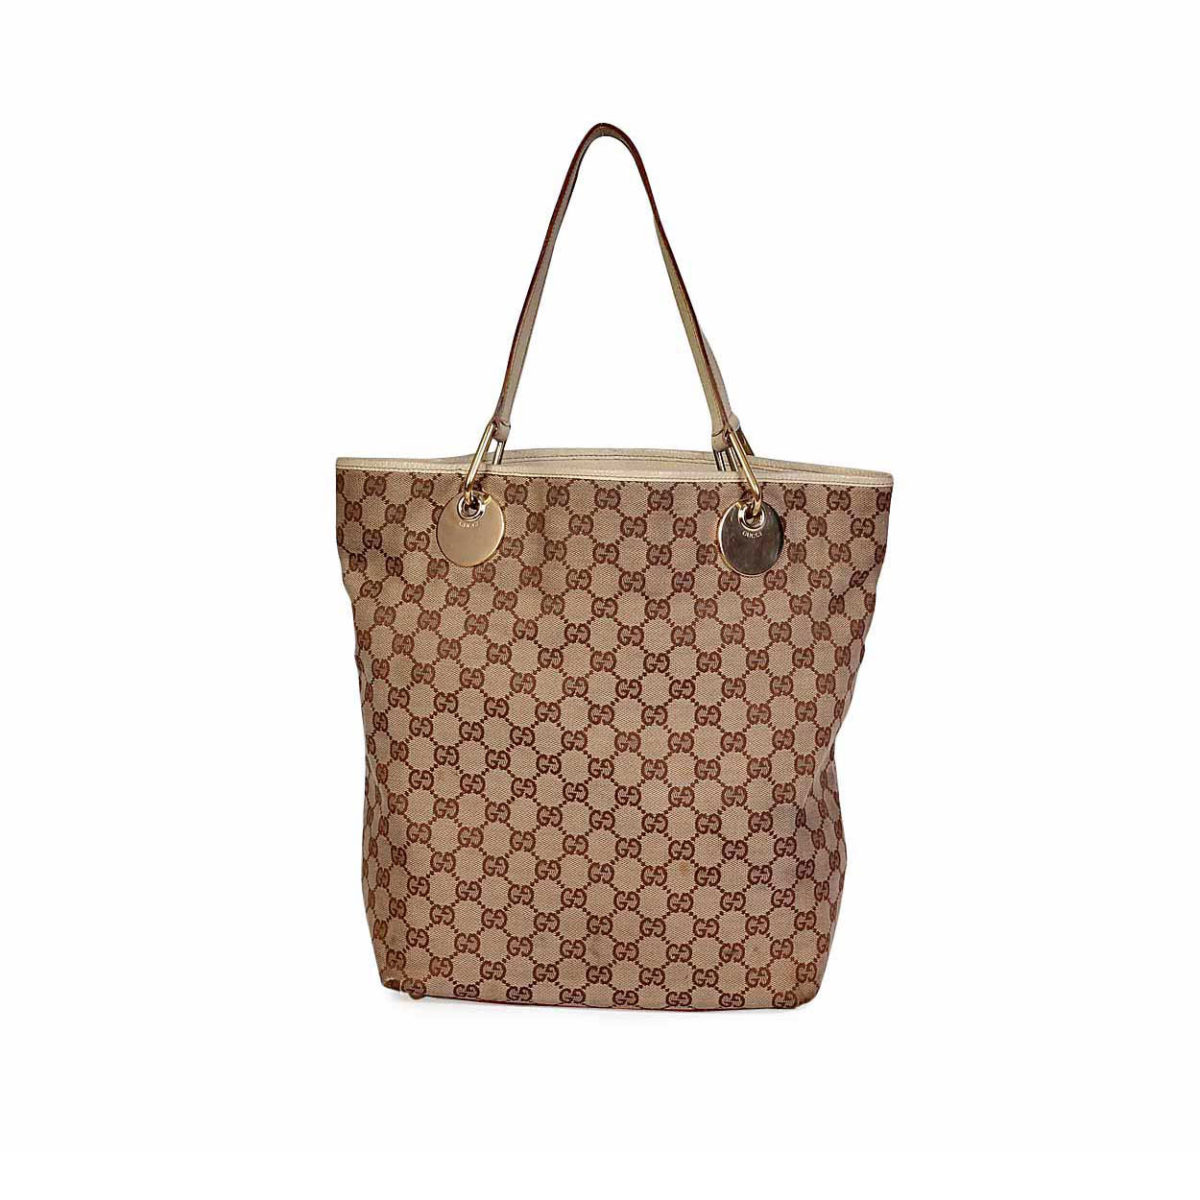 GUCCI GG Eclipse Tote Large | Luxity